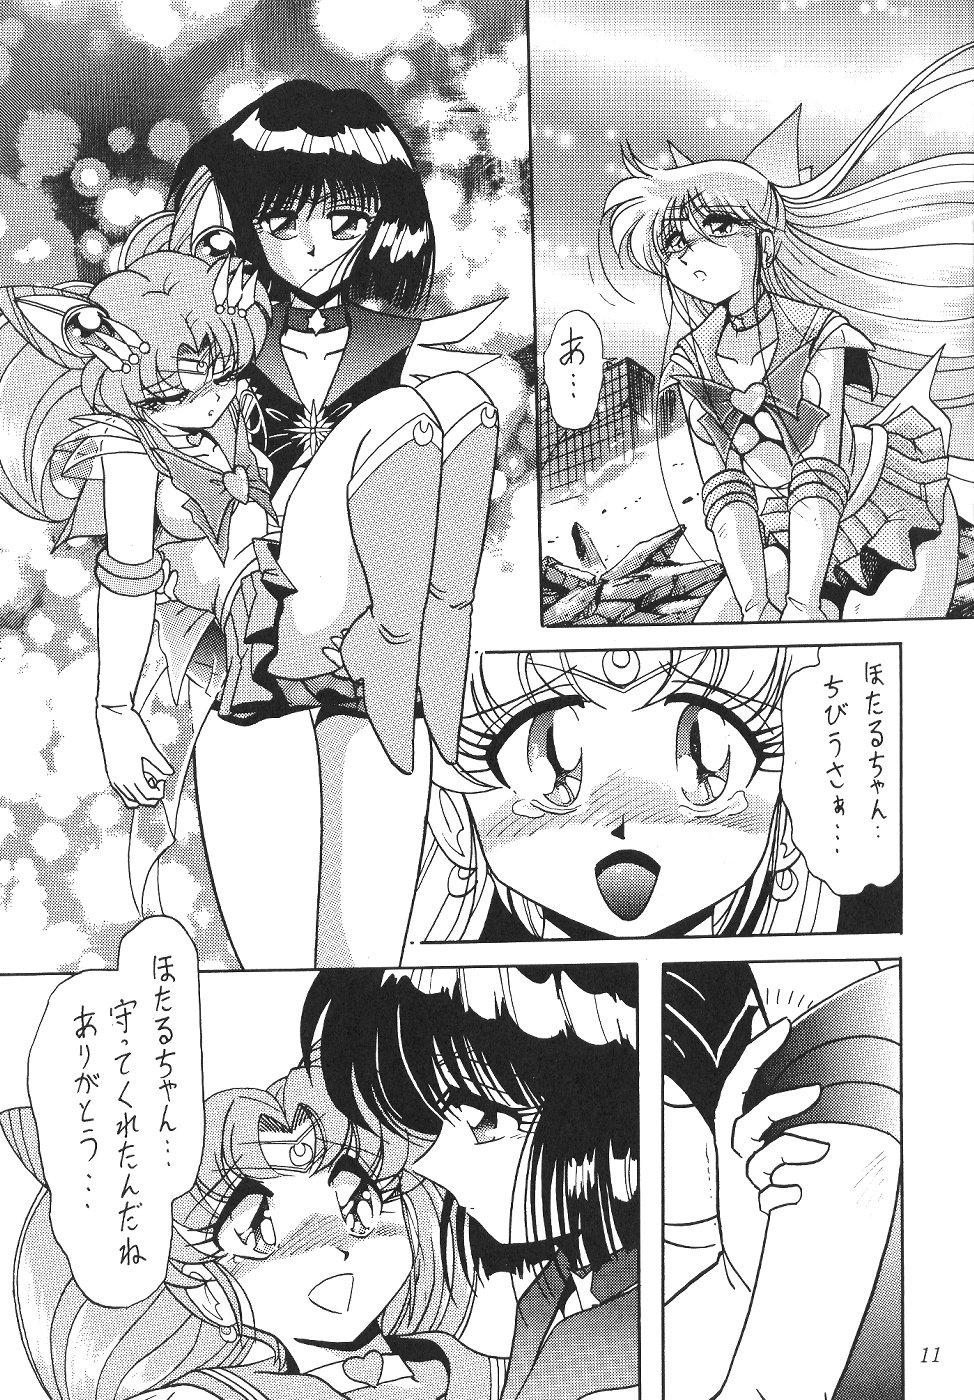 Huge Dick Silent Saturn 11 - Sailor moon Livecams - Page 11